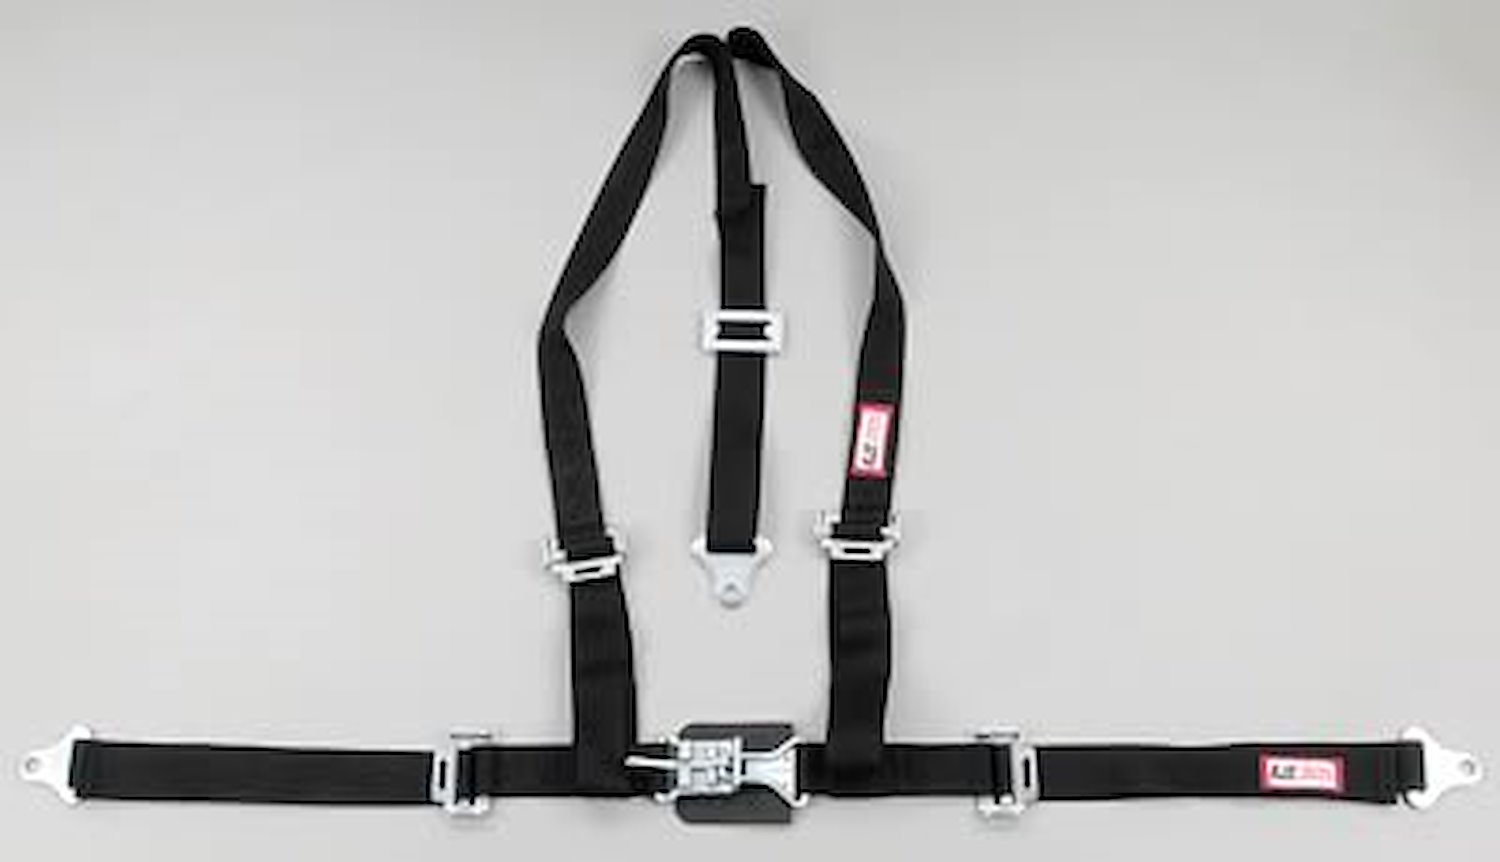 NON-SFI L&L HARNESS 3 PULL UP Lap Belt SNAP SEWN IN 2 S.H. Individual ROLL BAR Mount w/STERNUM STRAP WRAP/SNAP BLACK